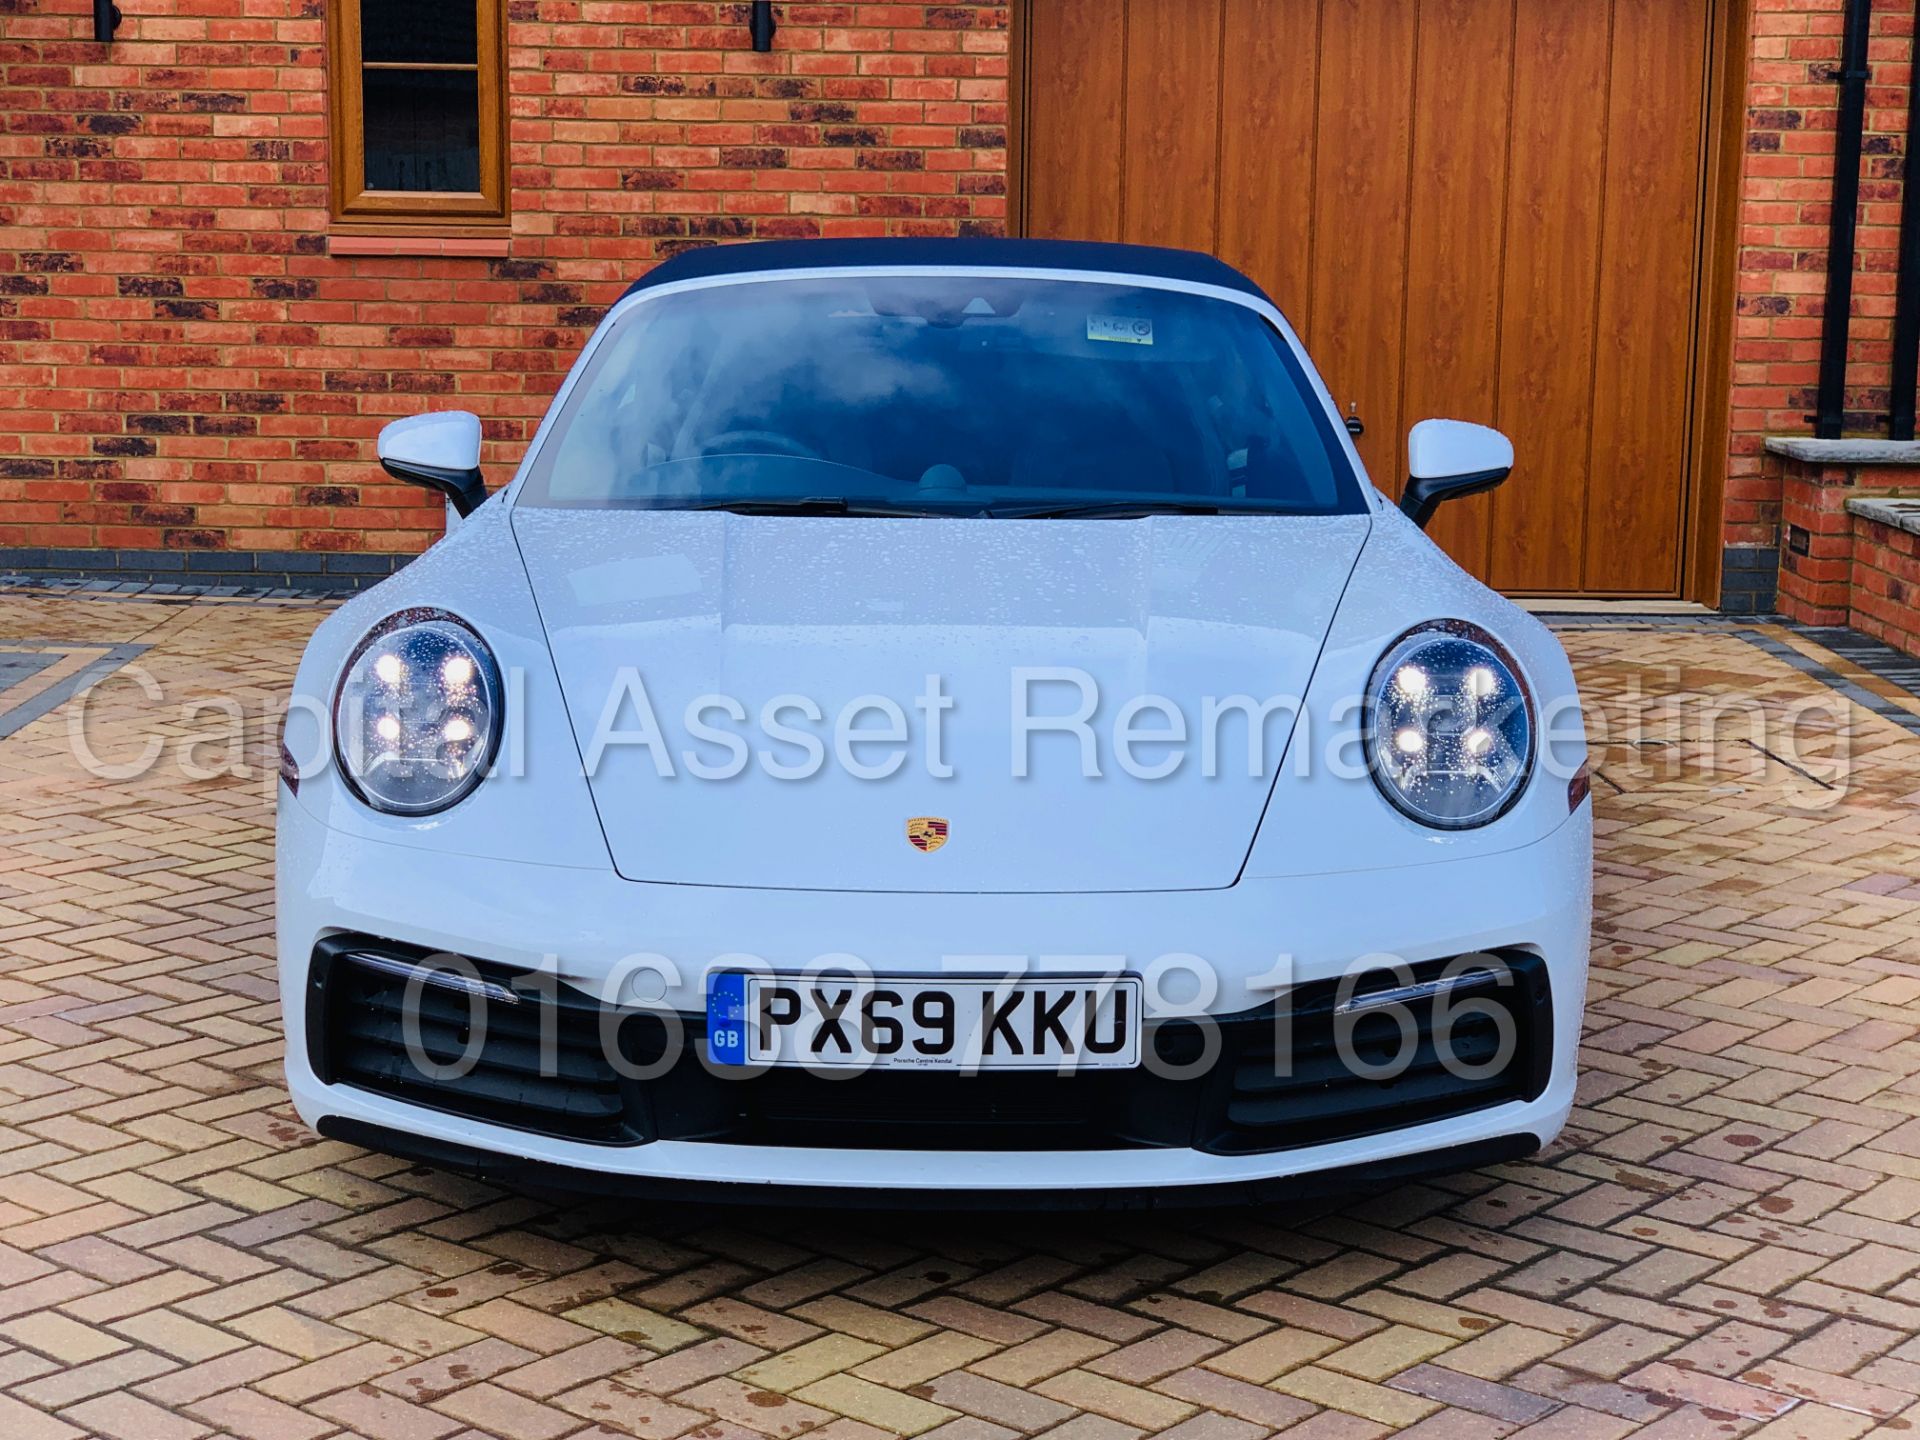 On Sale PORSCHE 911 CARRERA S-A *CABRIOLET* (2020 - NEW 992 MODEL) AUTO -SAT NAV - CHRONO PACK *WOW* - Image 27 of 82